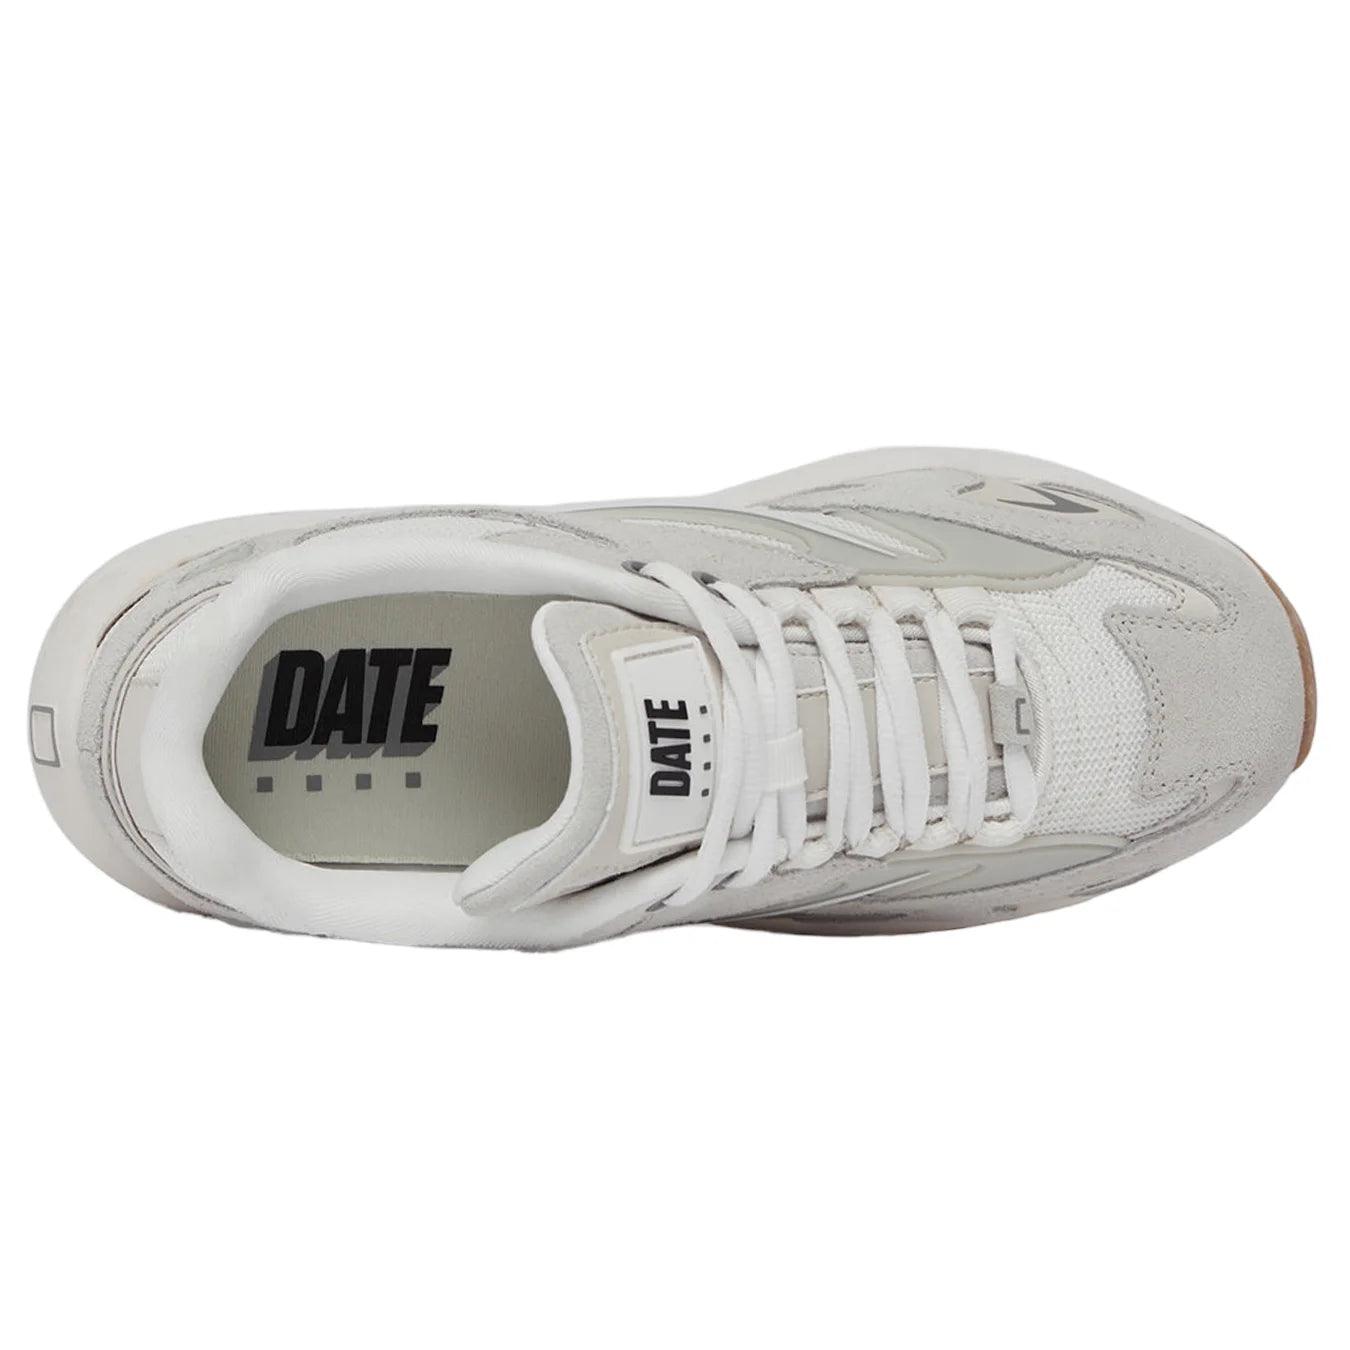 Date Sneakers Supernova Collec, W391.sn.cl.wh, Tion, Bianco, Bassiniboutique.it, 2023 a/i